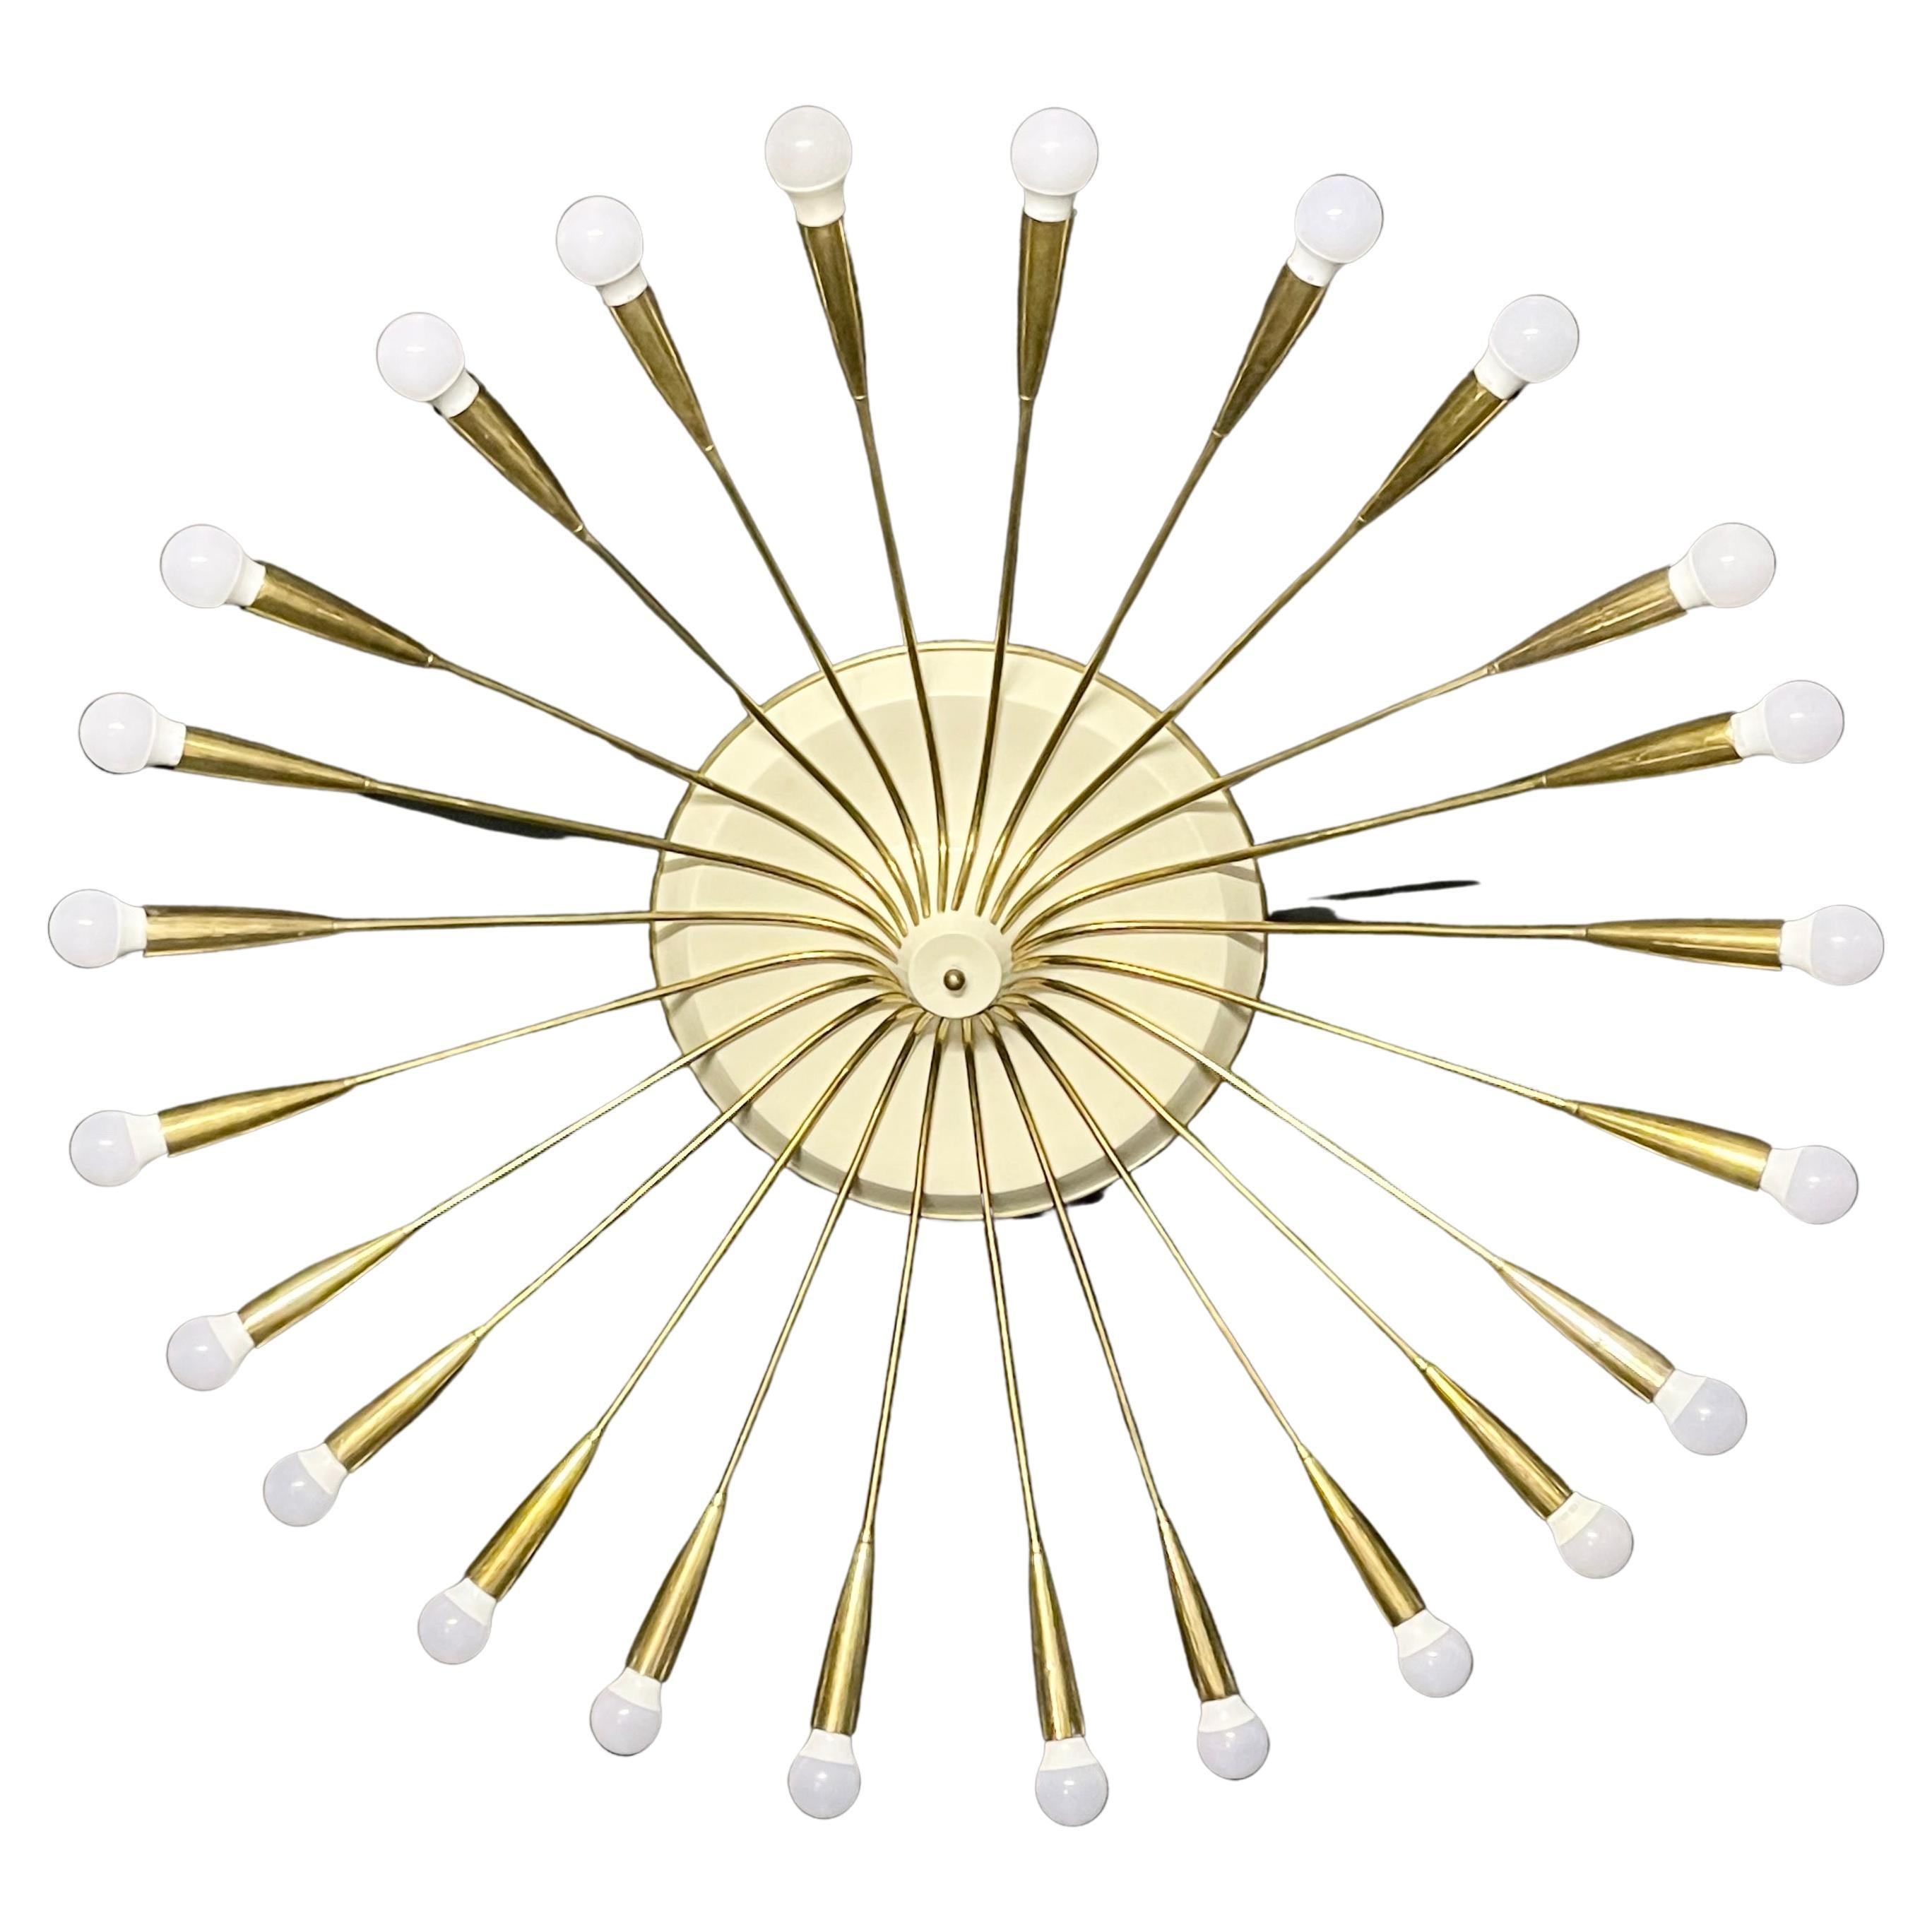 A huge German mid -century 24 -light Sputnik flush mount, Germany, circa 1950s.
This chandelier is made of polished brass and lacquered metal.
Measures: Diameter: 51.18 inches (without bulbs) 
Height: 11.81 inches
Socket: 24 x E27 or E26 for